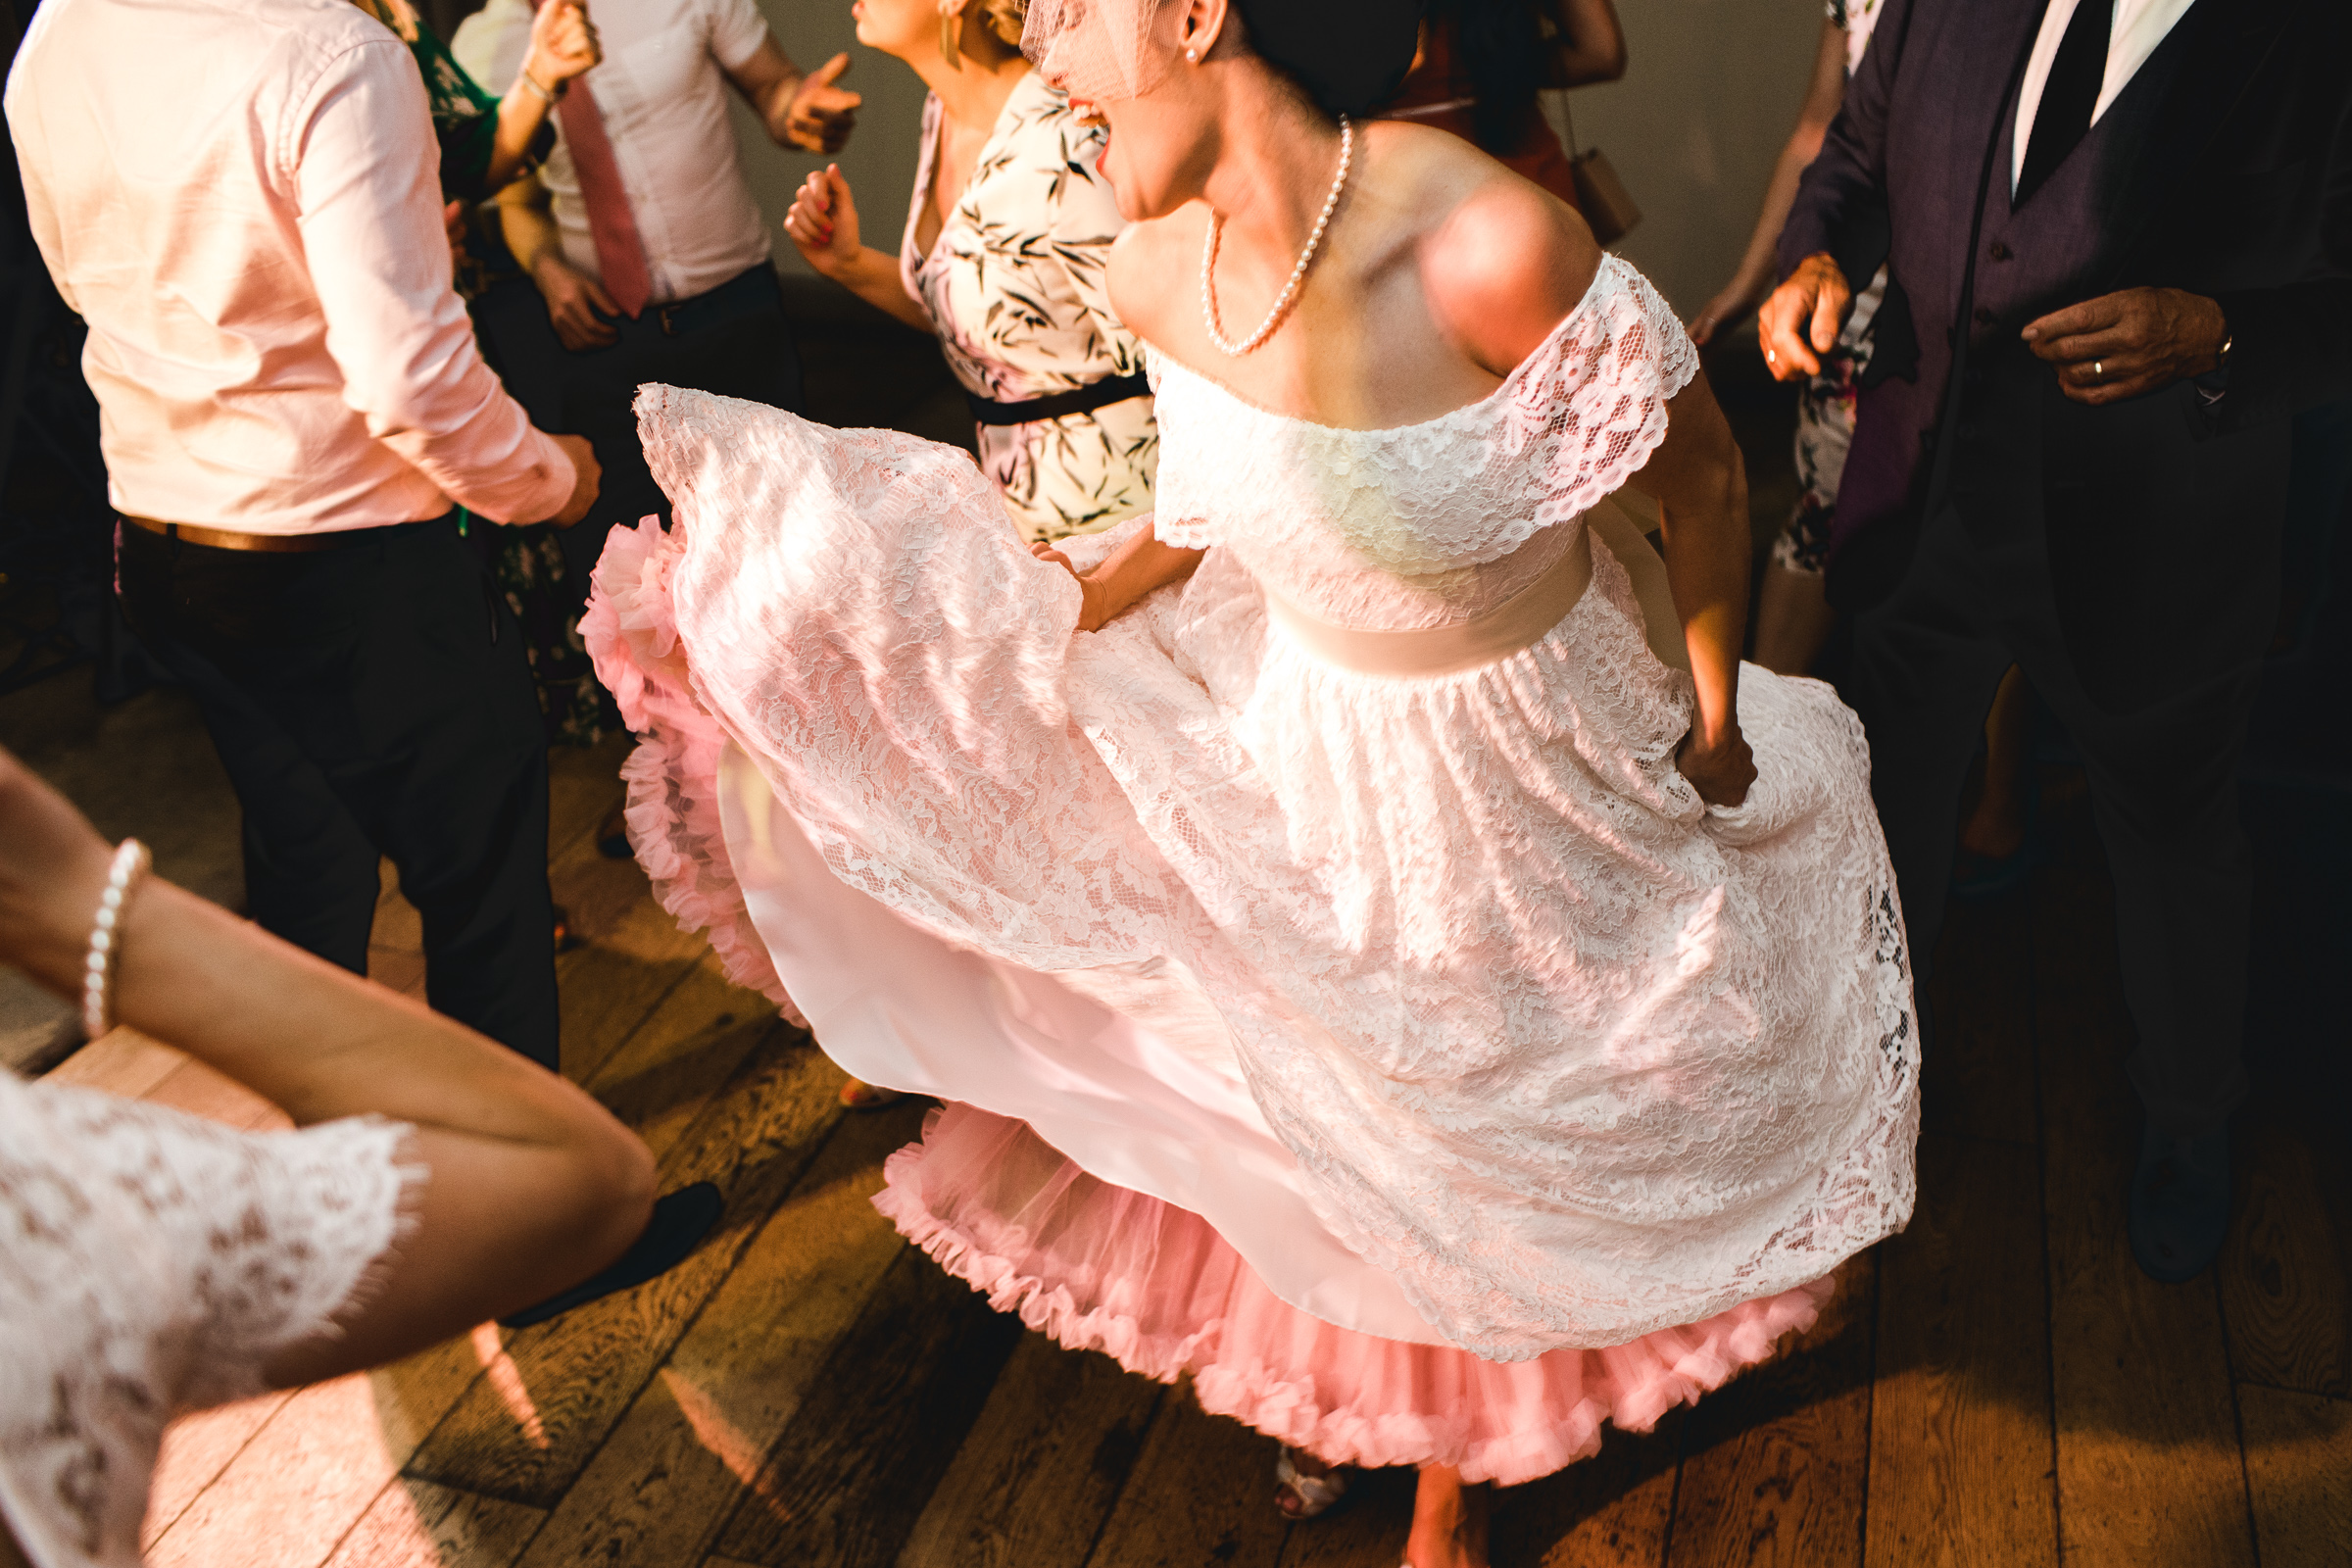 The bride dressed in a vintage style off the shoulder lace dress is dancing. She is holding her dress and singing. She is in the Foundry at the Houchins wedding venue.